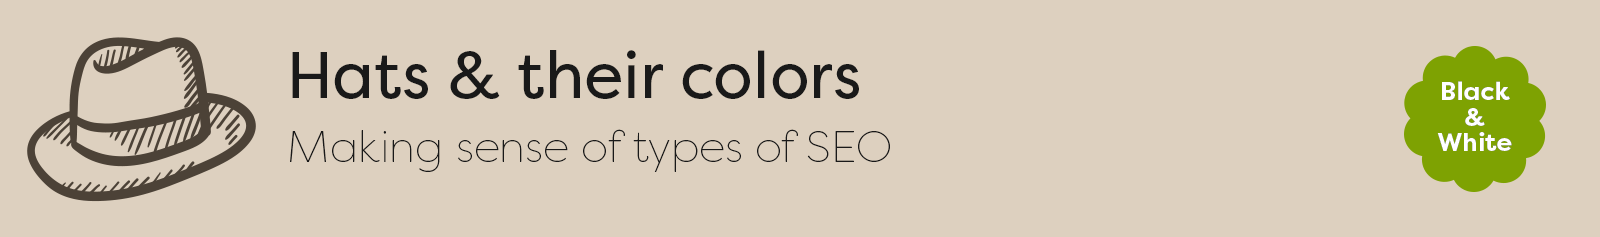 Hats & their colors: Making sense of types of SEO